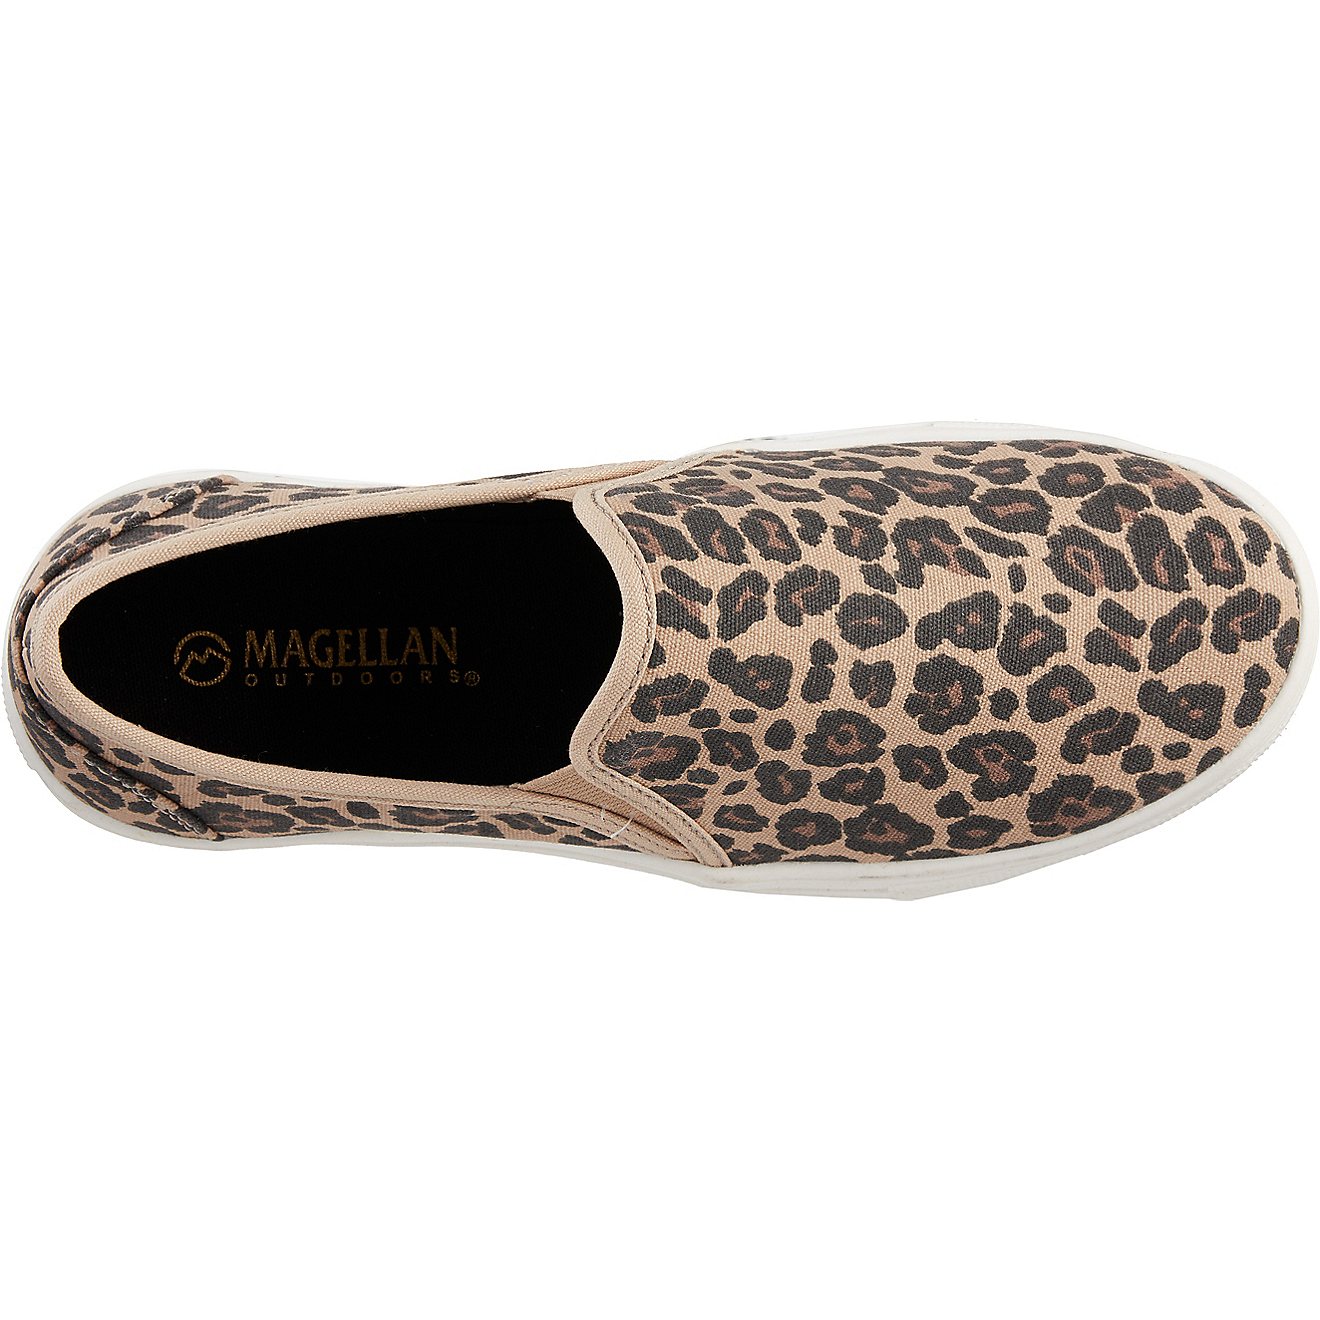 Magellan Outdoors Women's Leopard Classic Twin Gore Shoes                                                                        - view number 3